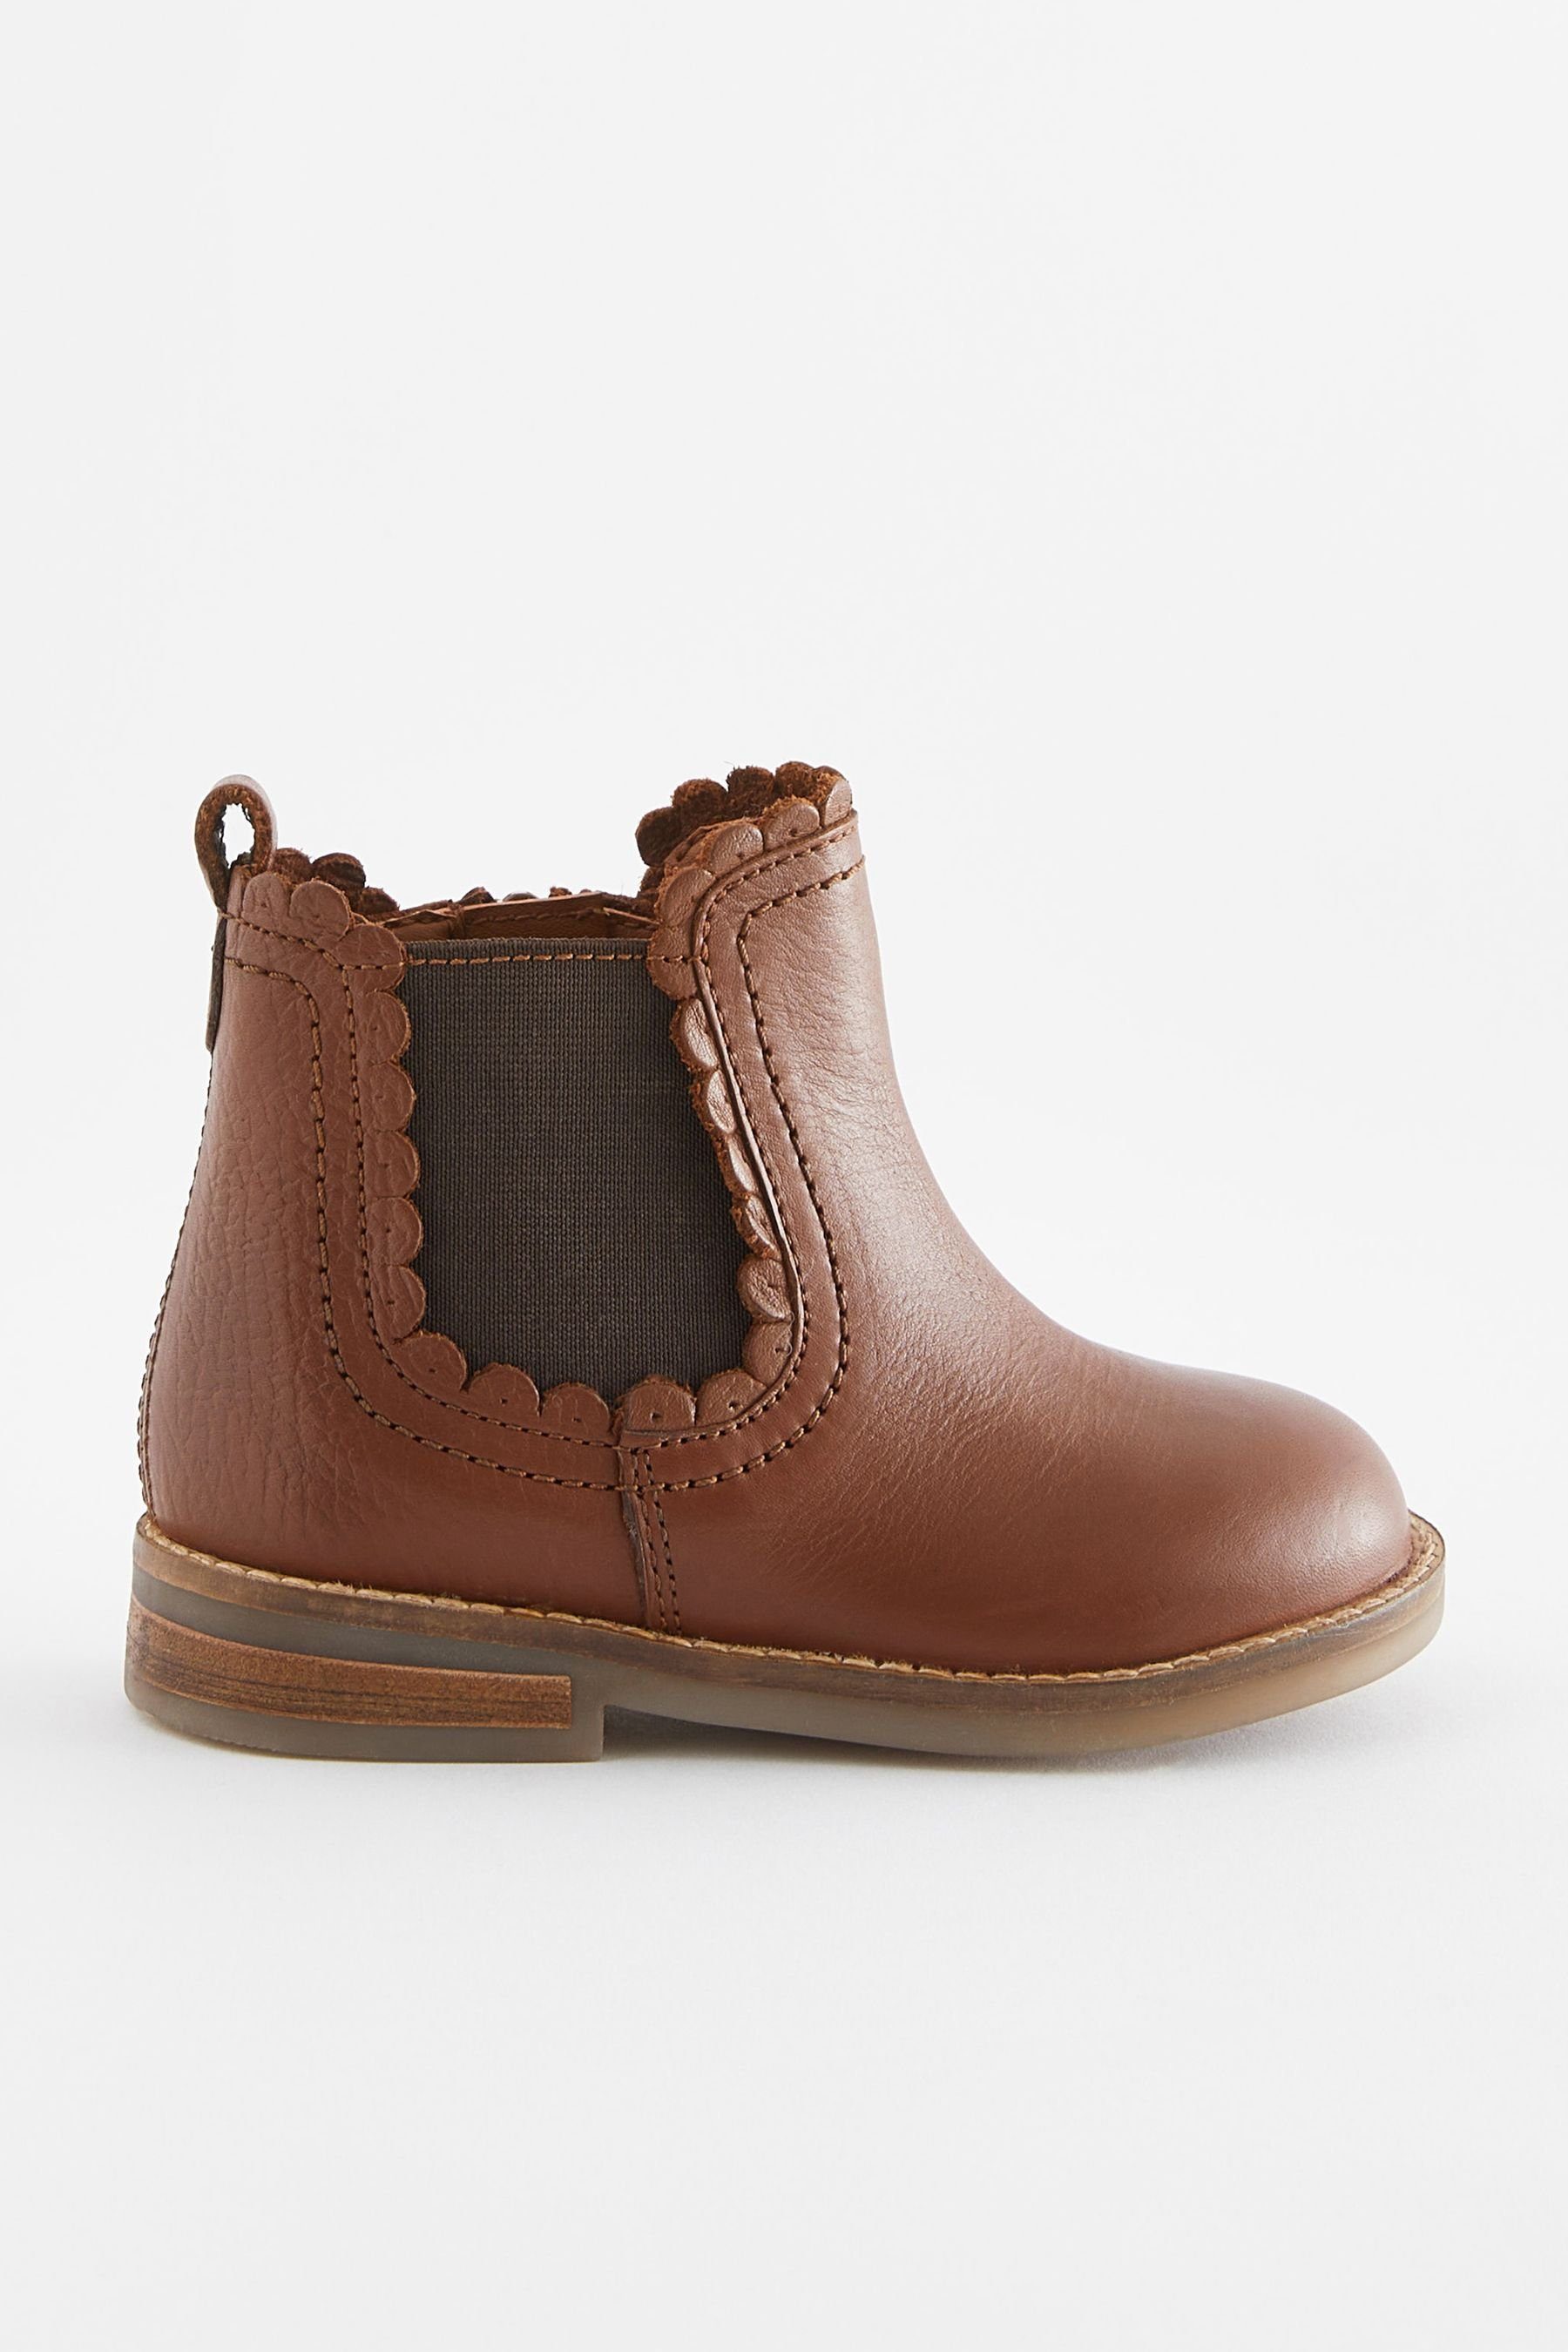 Passform Chelseaboots weite Bogenkante, mit (1-tlg) Brown Next Chelsea-Boots Tan Leather